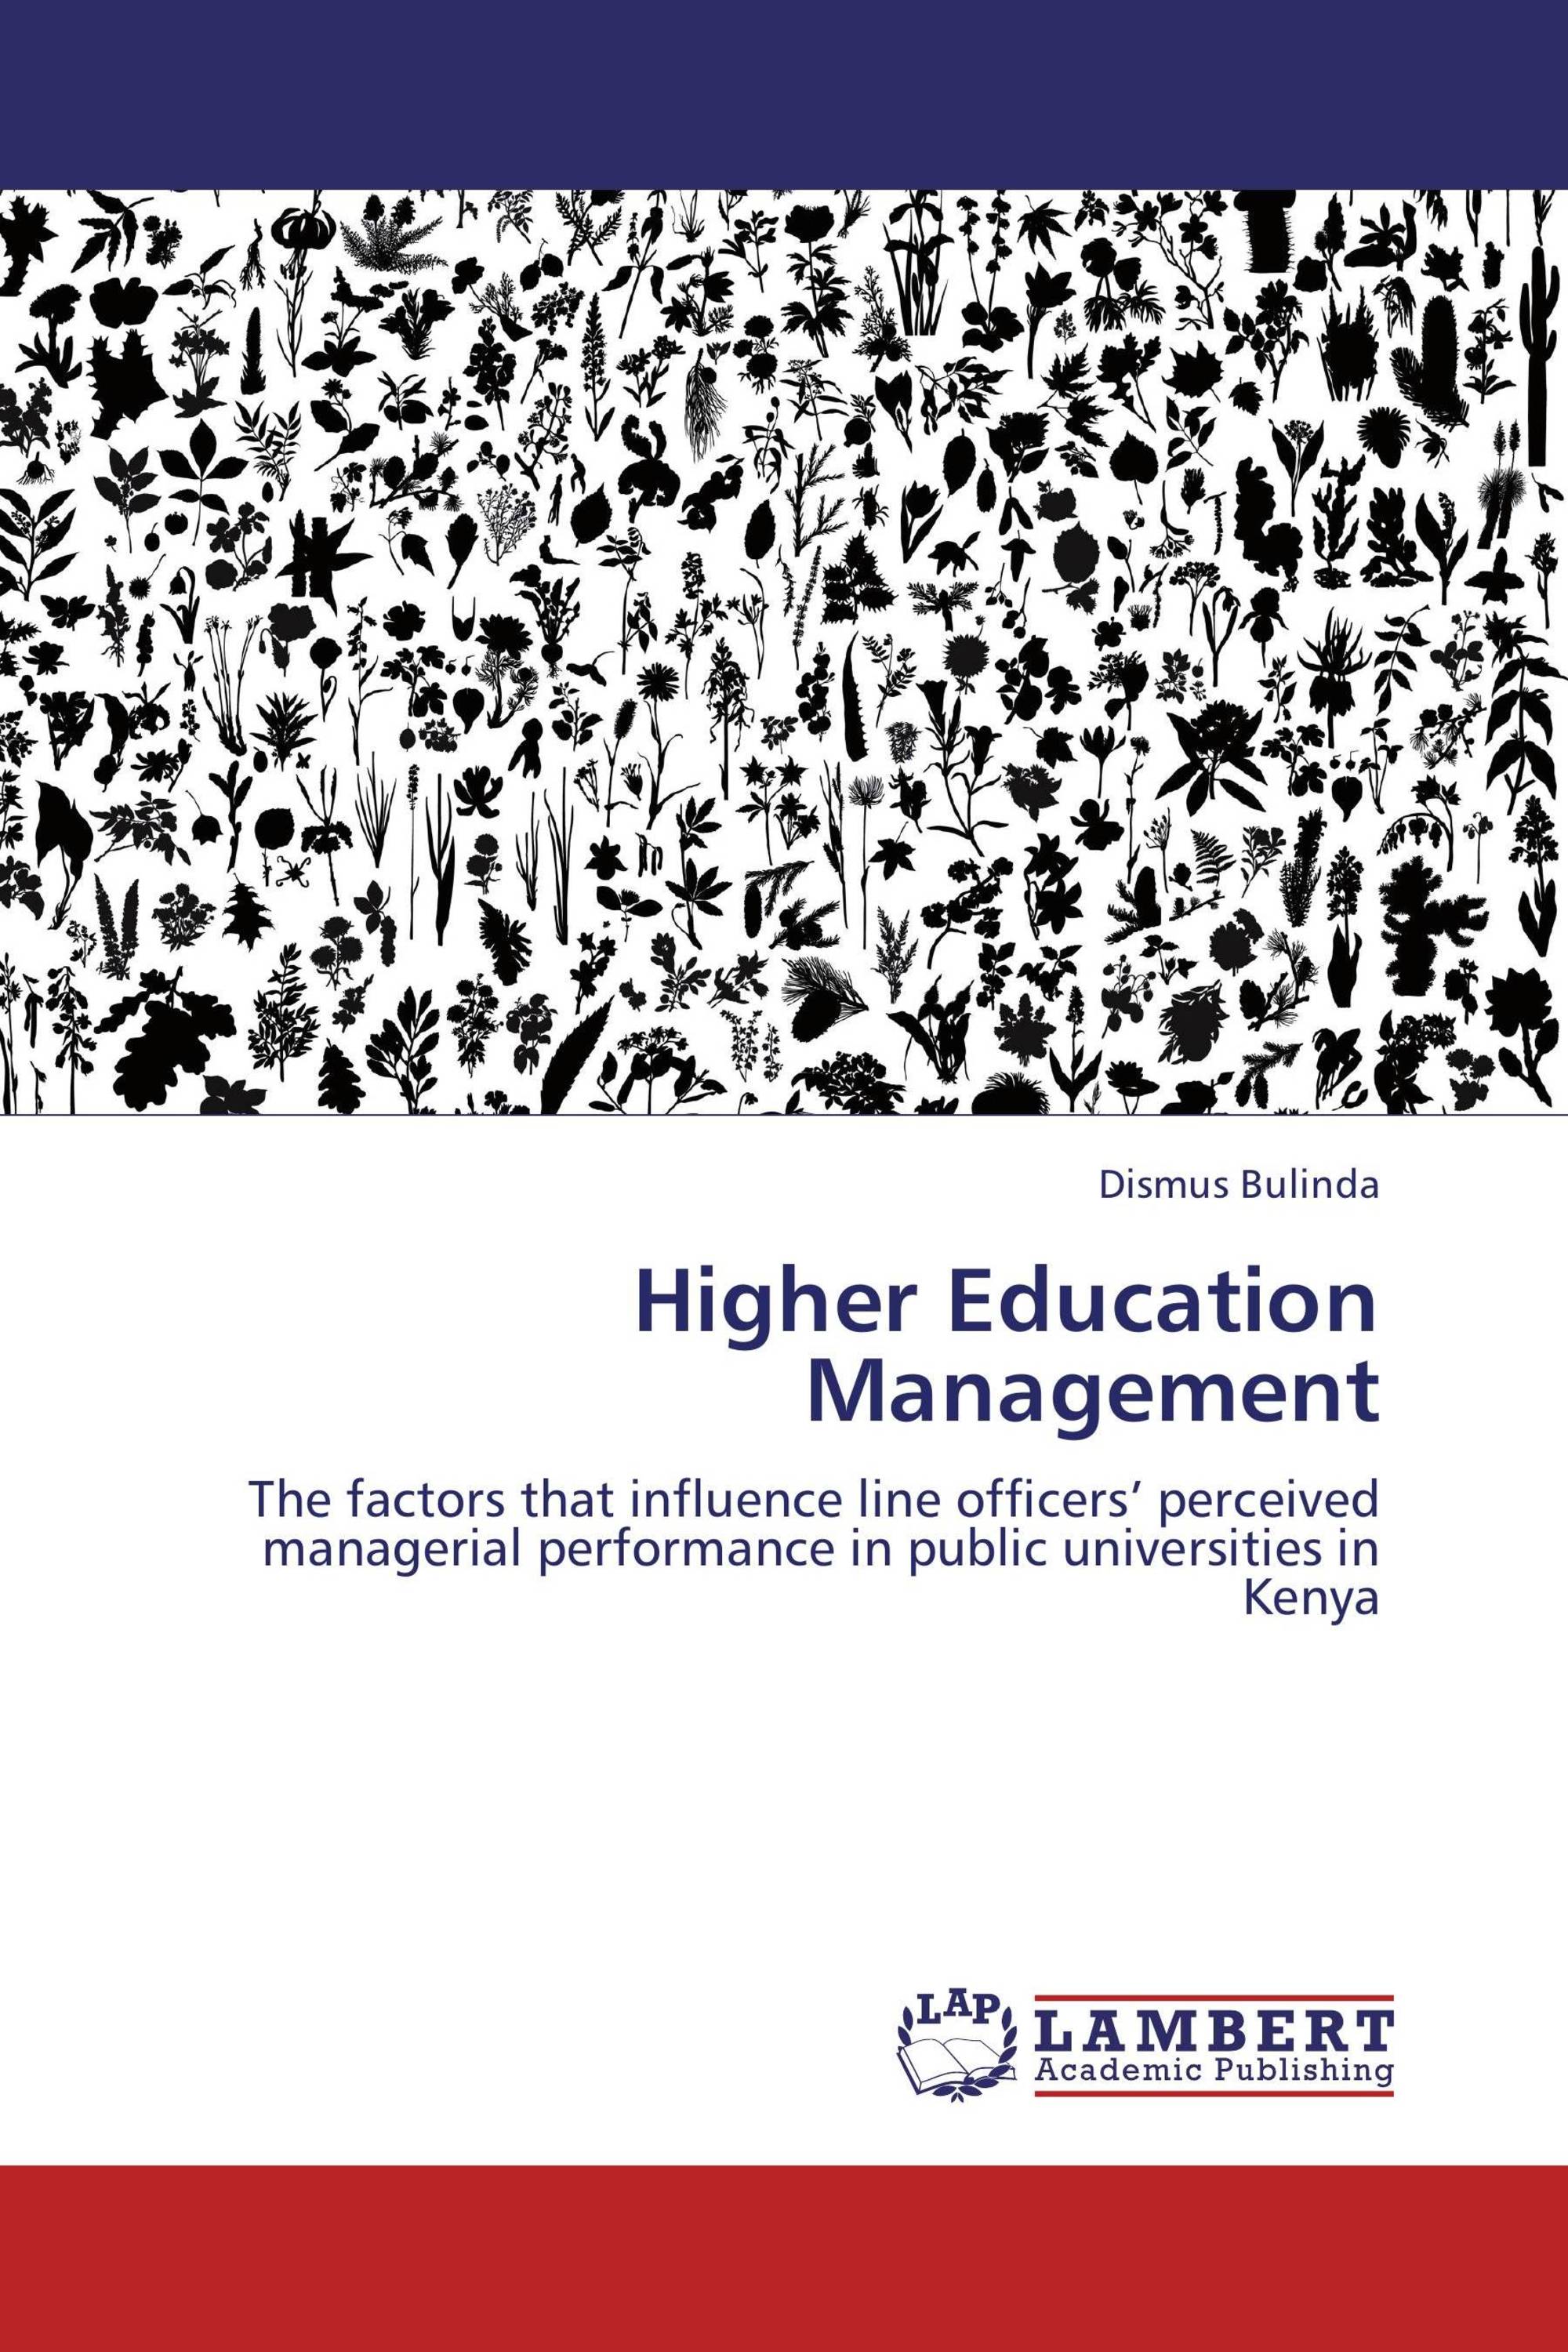 research on education management